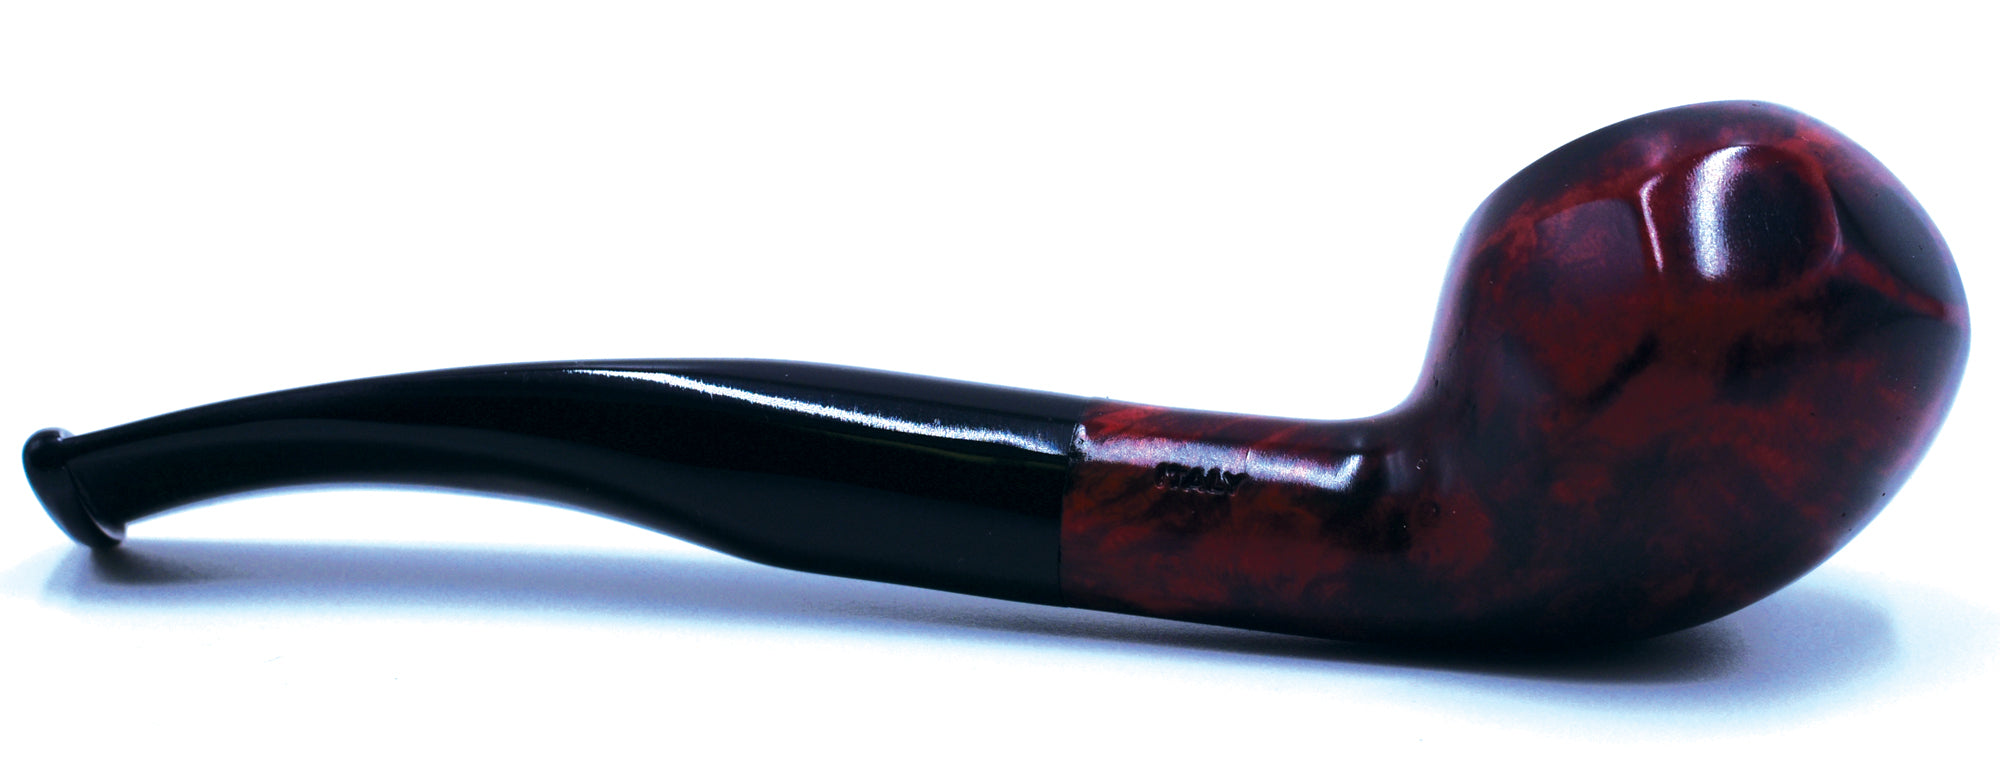 LEGENDEX® SCALADI* 9 MM Filtered Briar Smoking Pipe Made In Italy 01-08-154